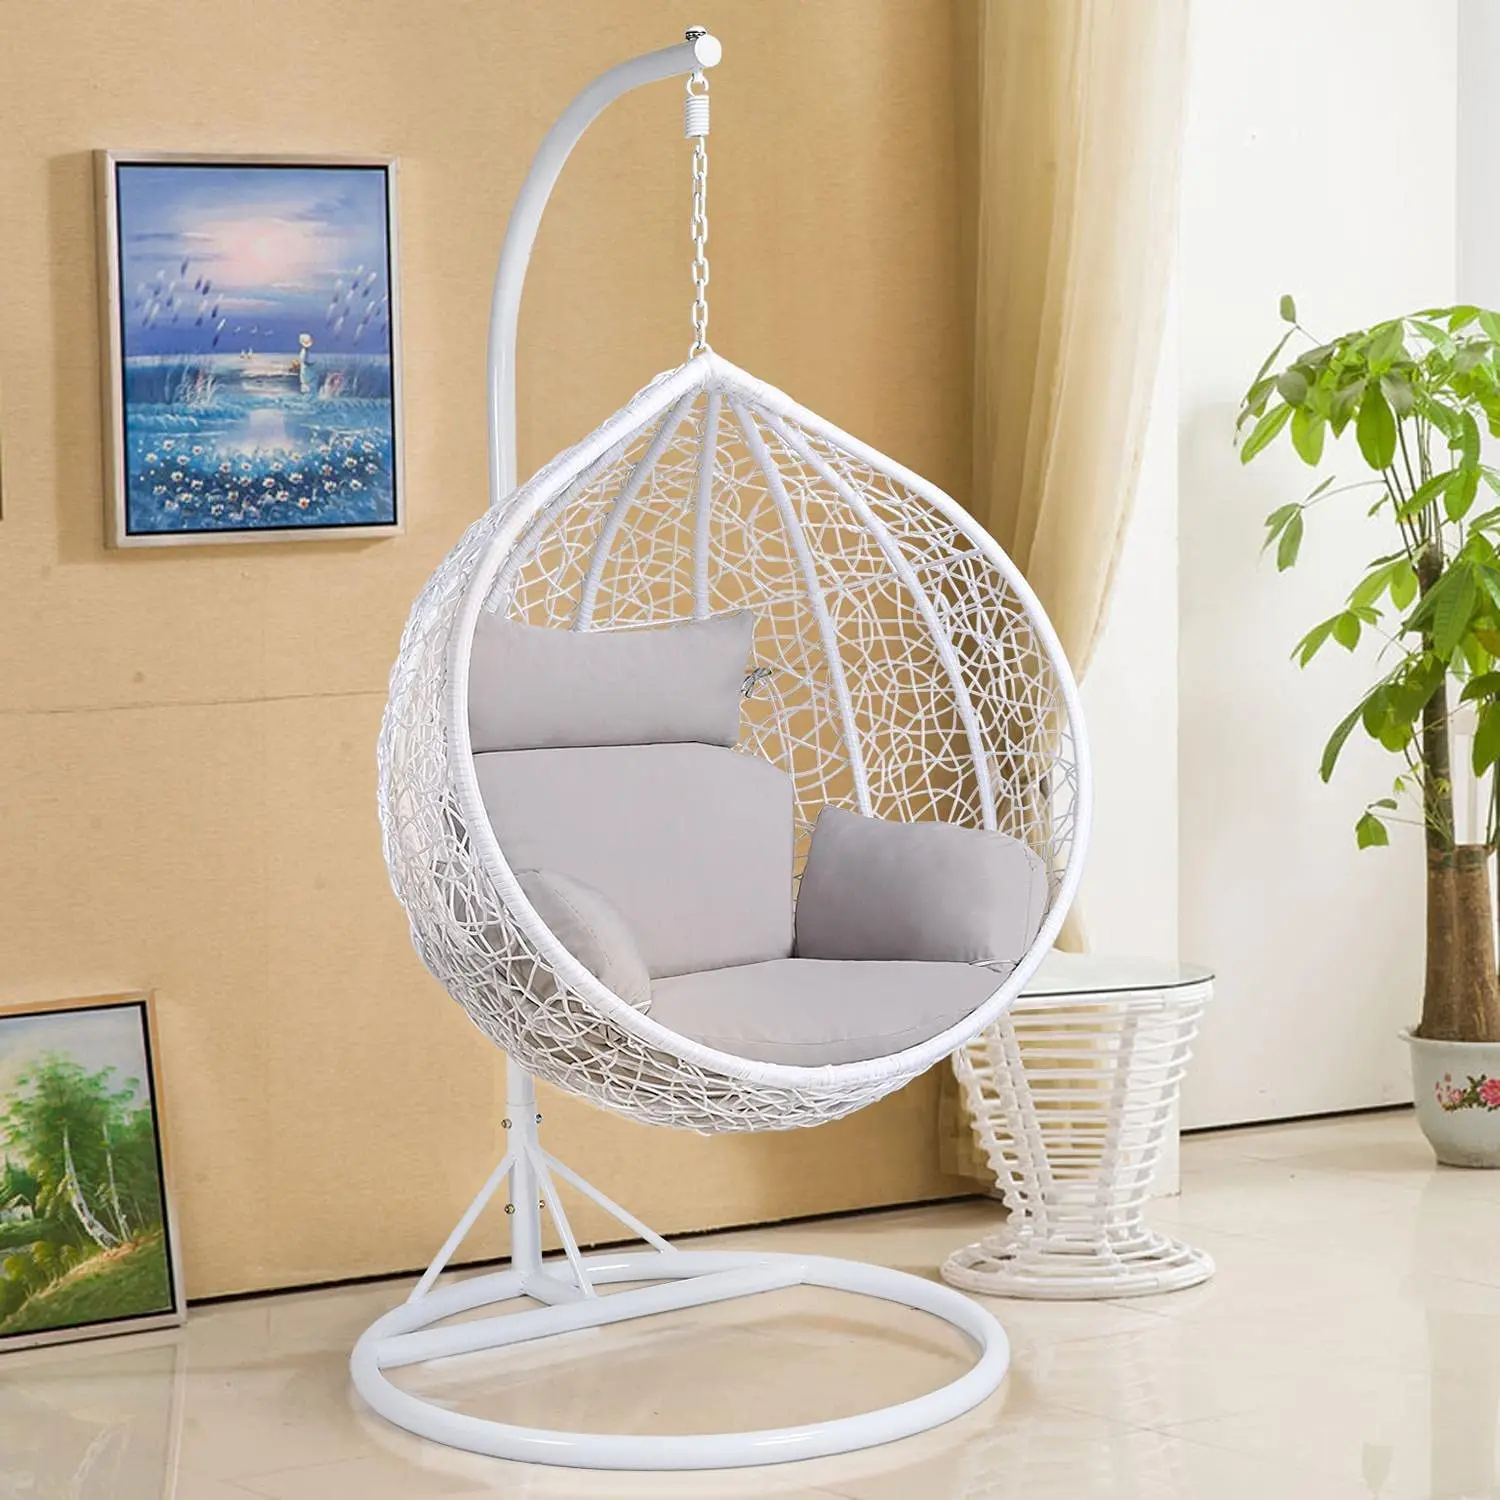 Popular Outdoor Garden Hanging Egg Chair Swing Chair - Buy Hanging Egg Chair,Egg  Chair Hanging,Egg Hanging Chair Product on Alibaba.com